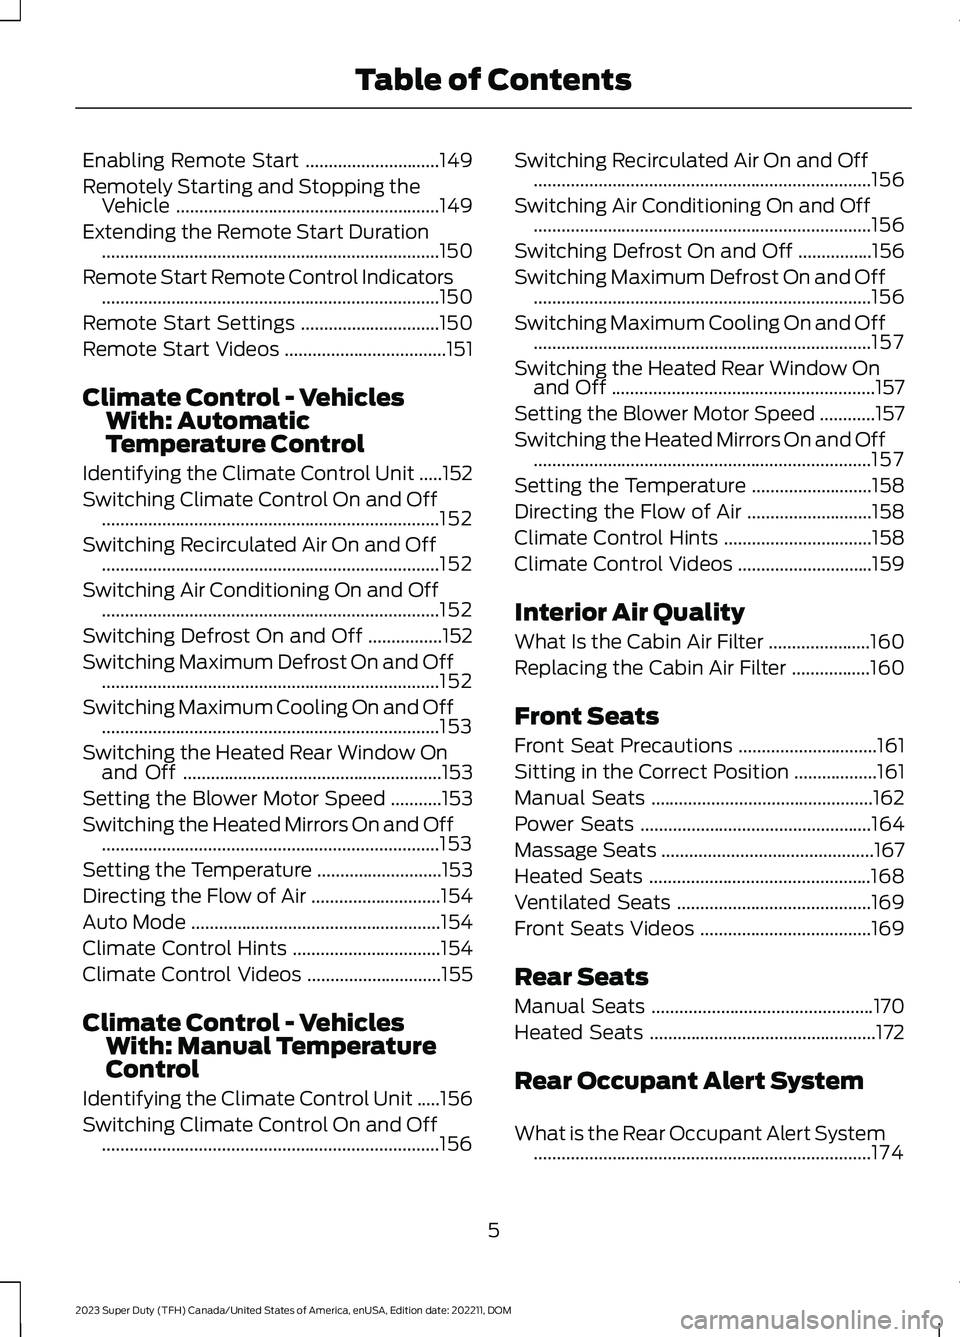 FORD SUPER DUTY 2023  Owners Manual Enabling Remote Start.............................149
Remotely Starting and Stopping theVehicle.........................................................149
Extending the Remote Start Duration.........